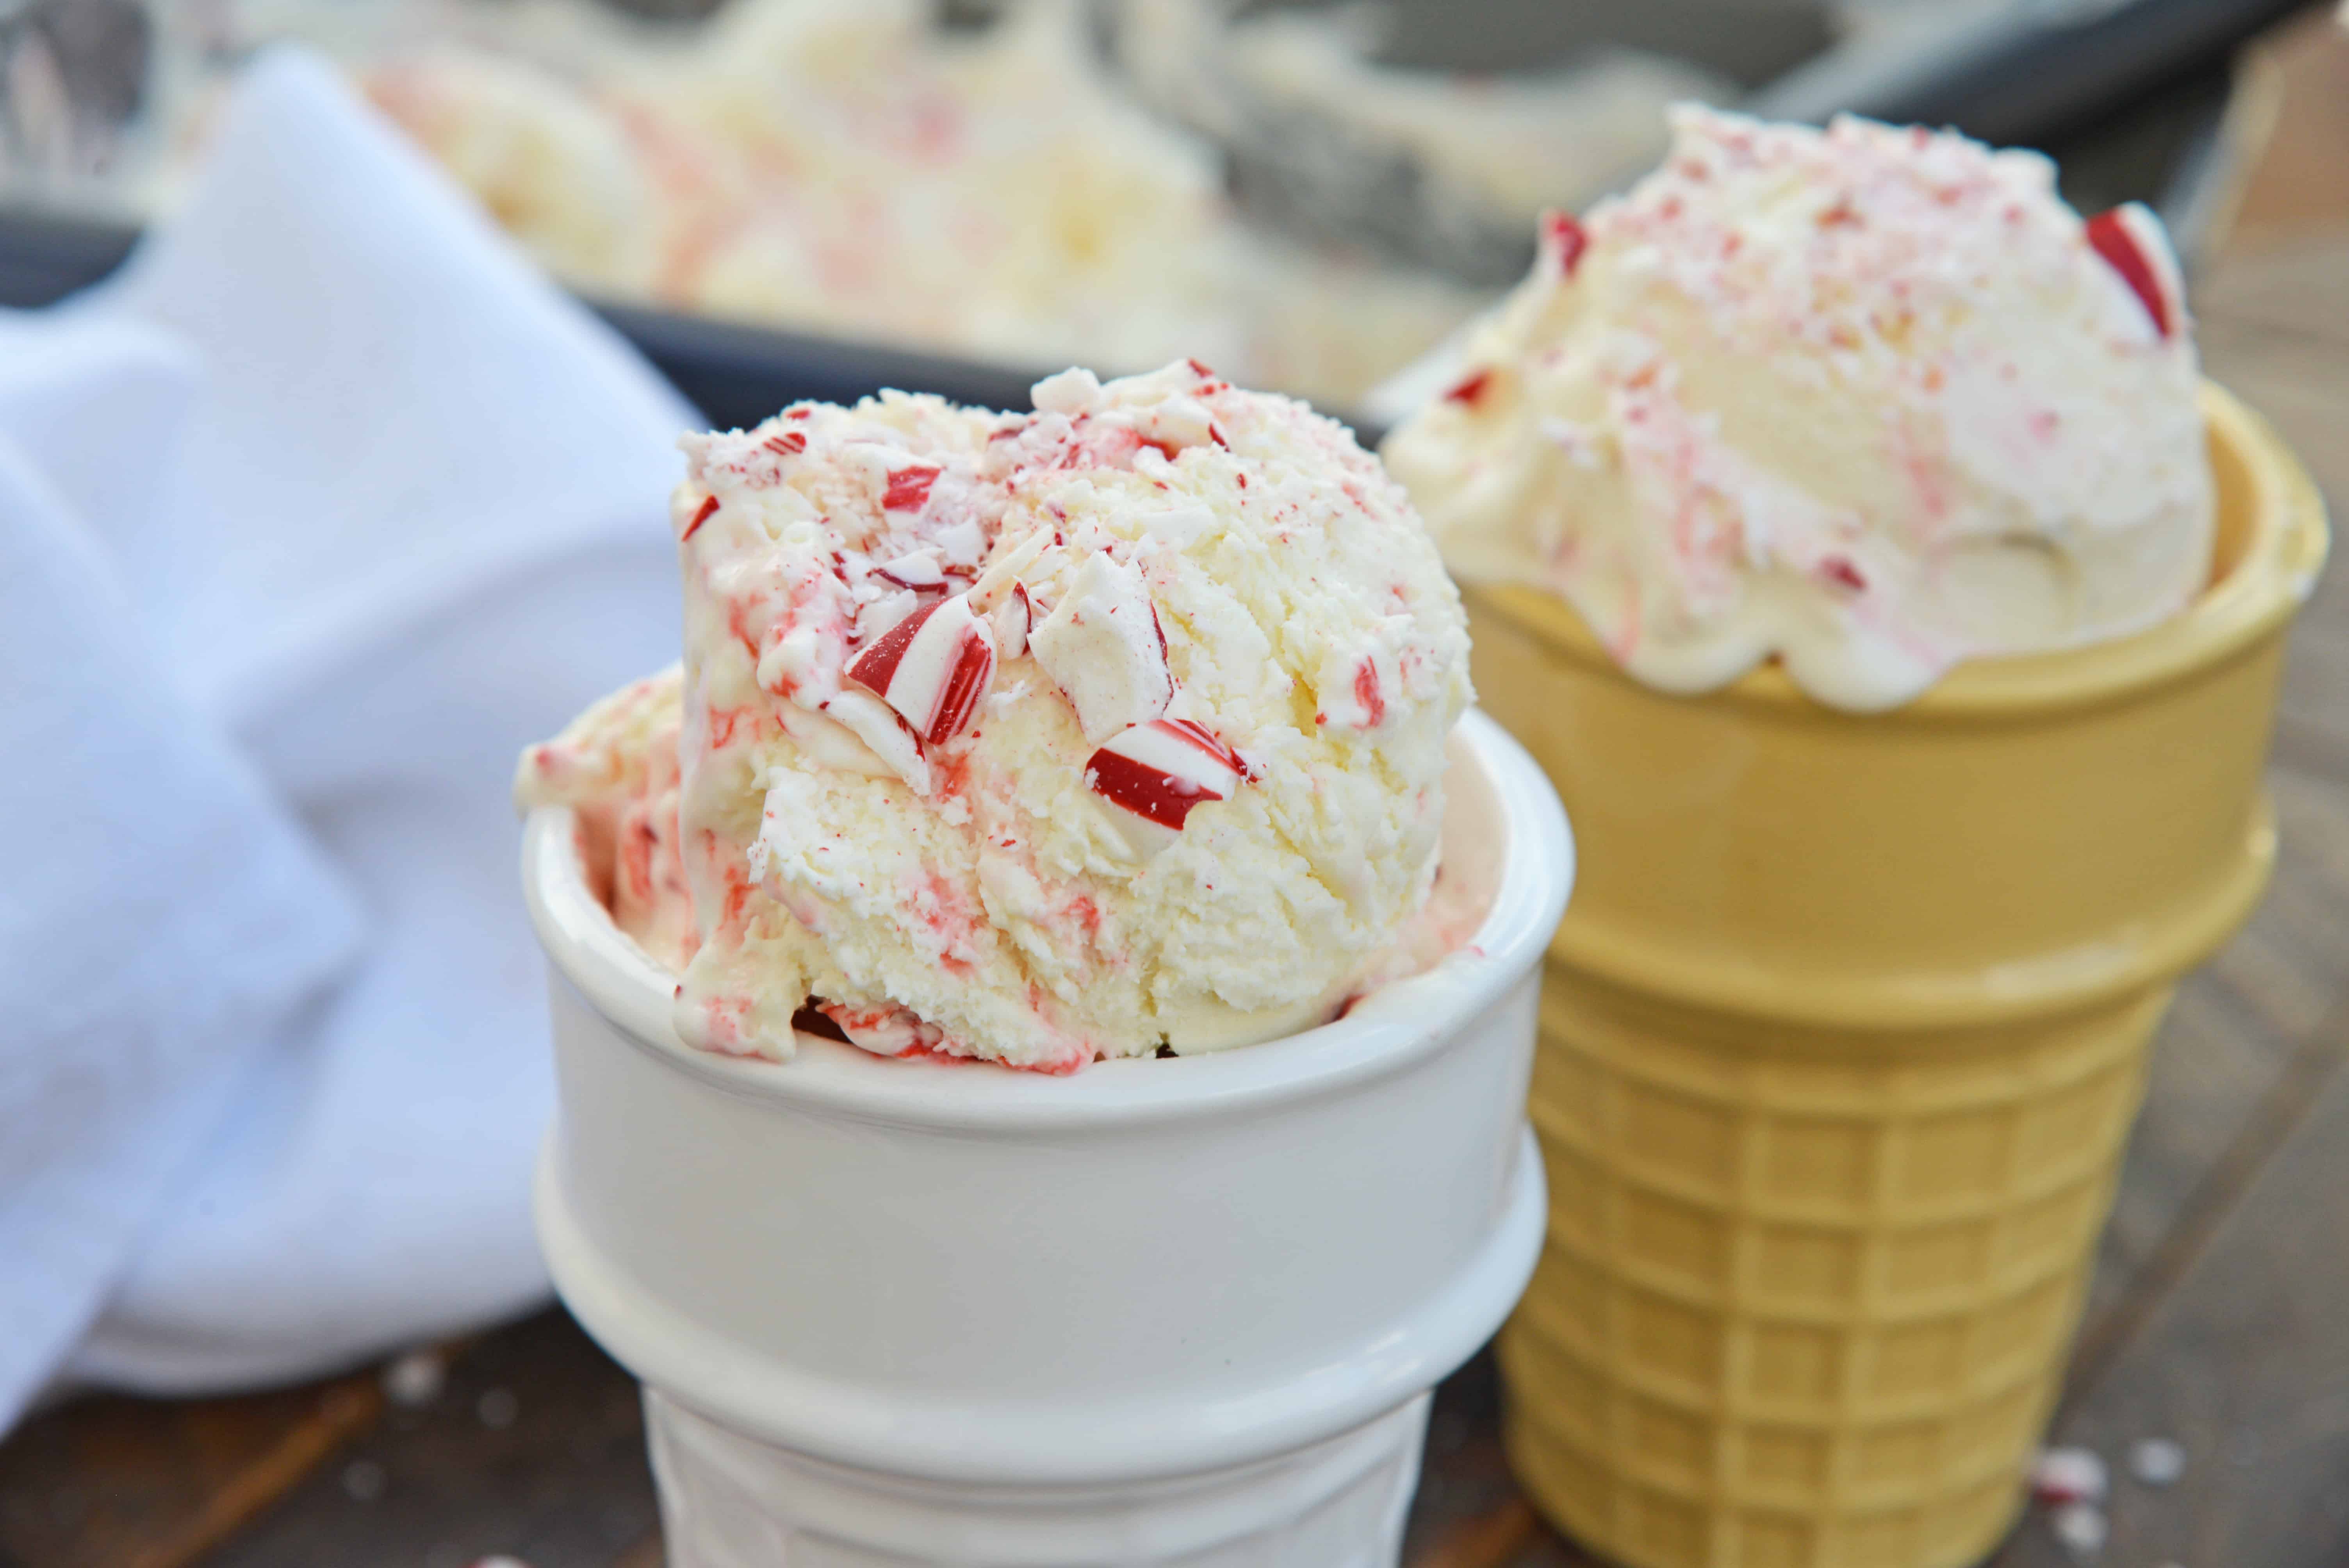 No-Churn Peppermint Ice Cream is an easy homemade ice cream recipe made with just 5 ingredients. No ice cream maker required! Perfect for the holidays. #candycaneicecream #nochurnicecream #homemadeicecreamrecipes www.savoryexperiments.com